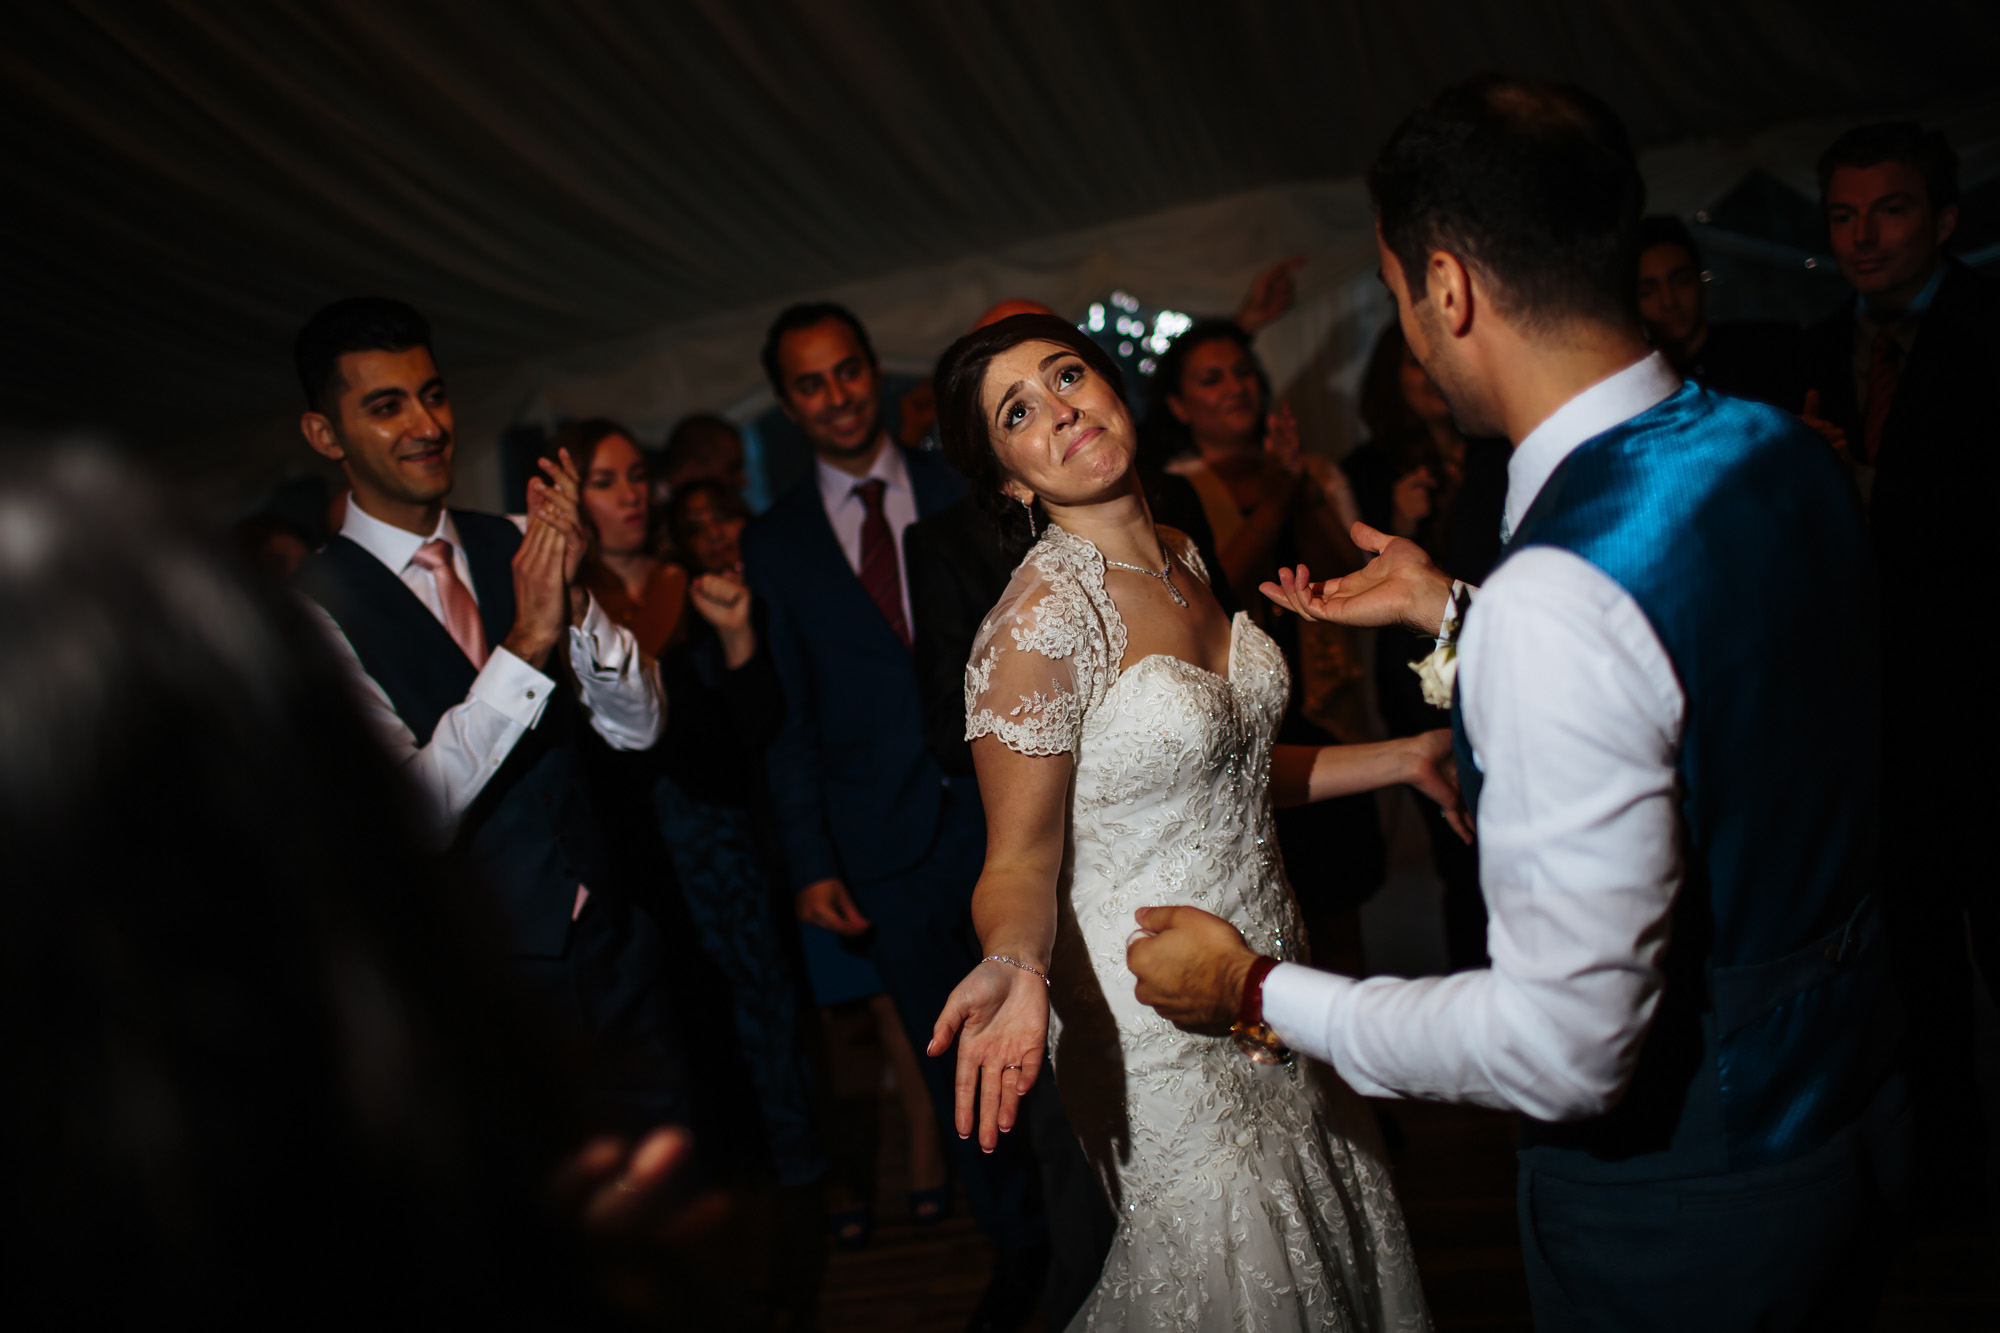 Bride laughing and dancing at a wedding